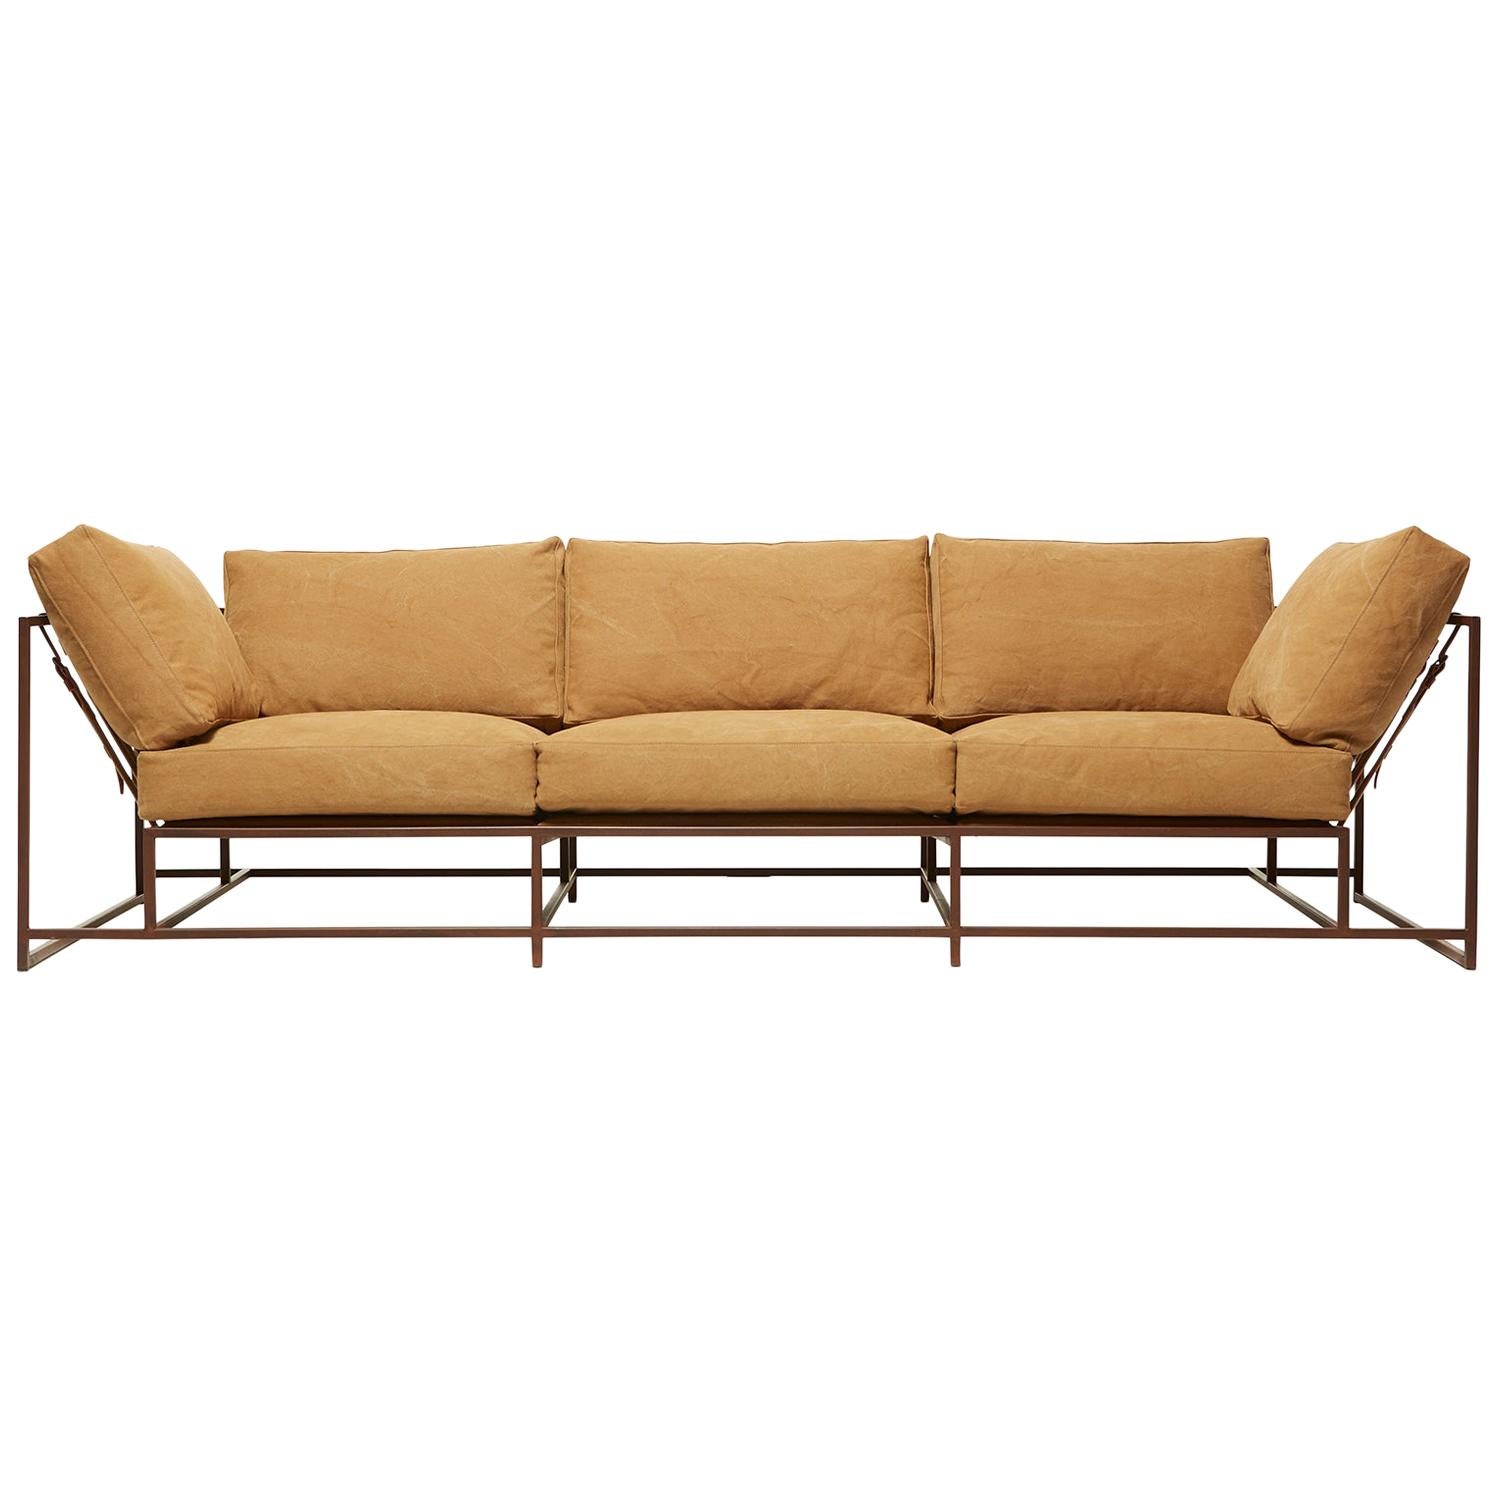 Desert Tan Heavy Canvas and Marbled Rust Sofa